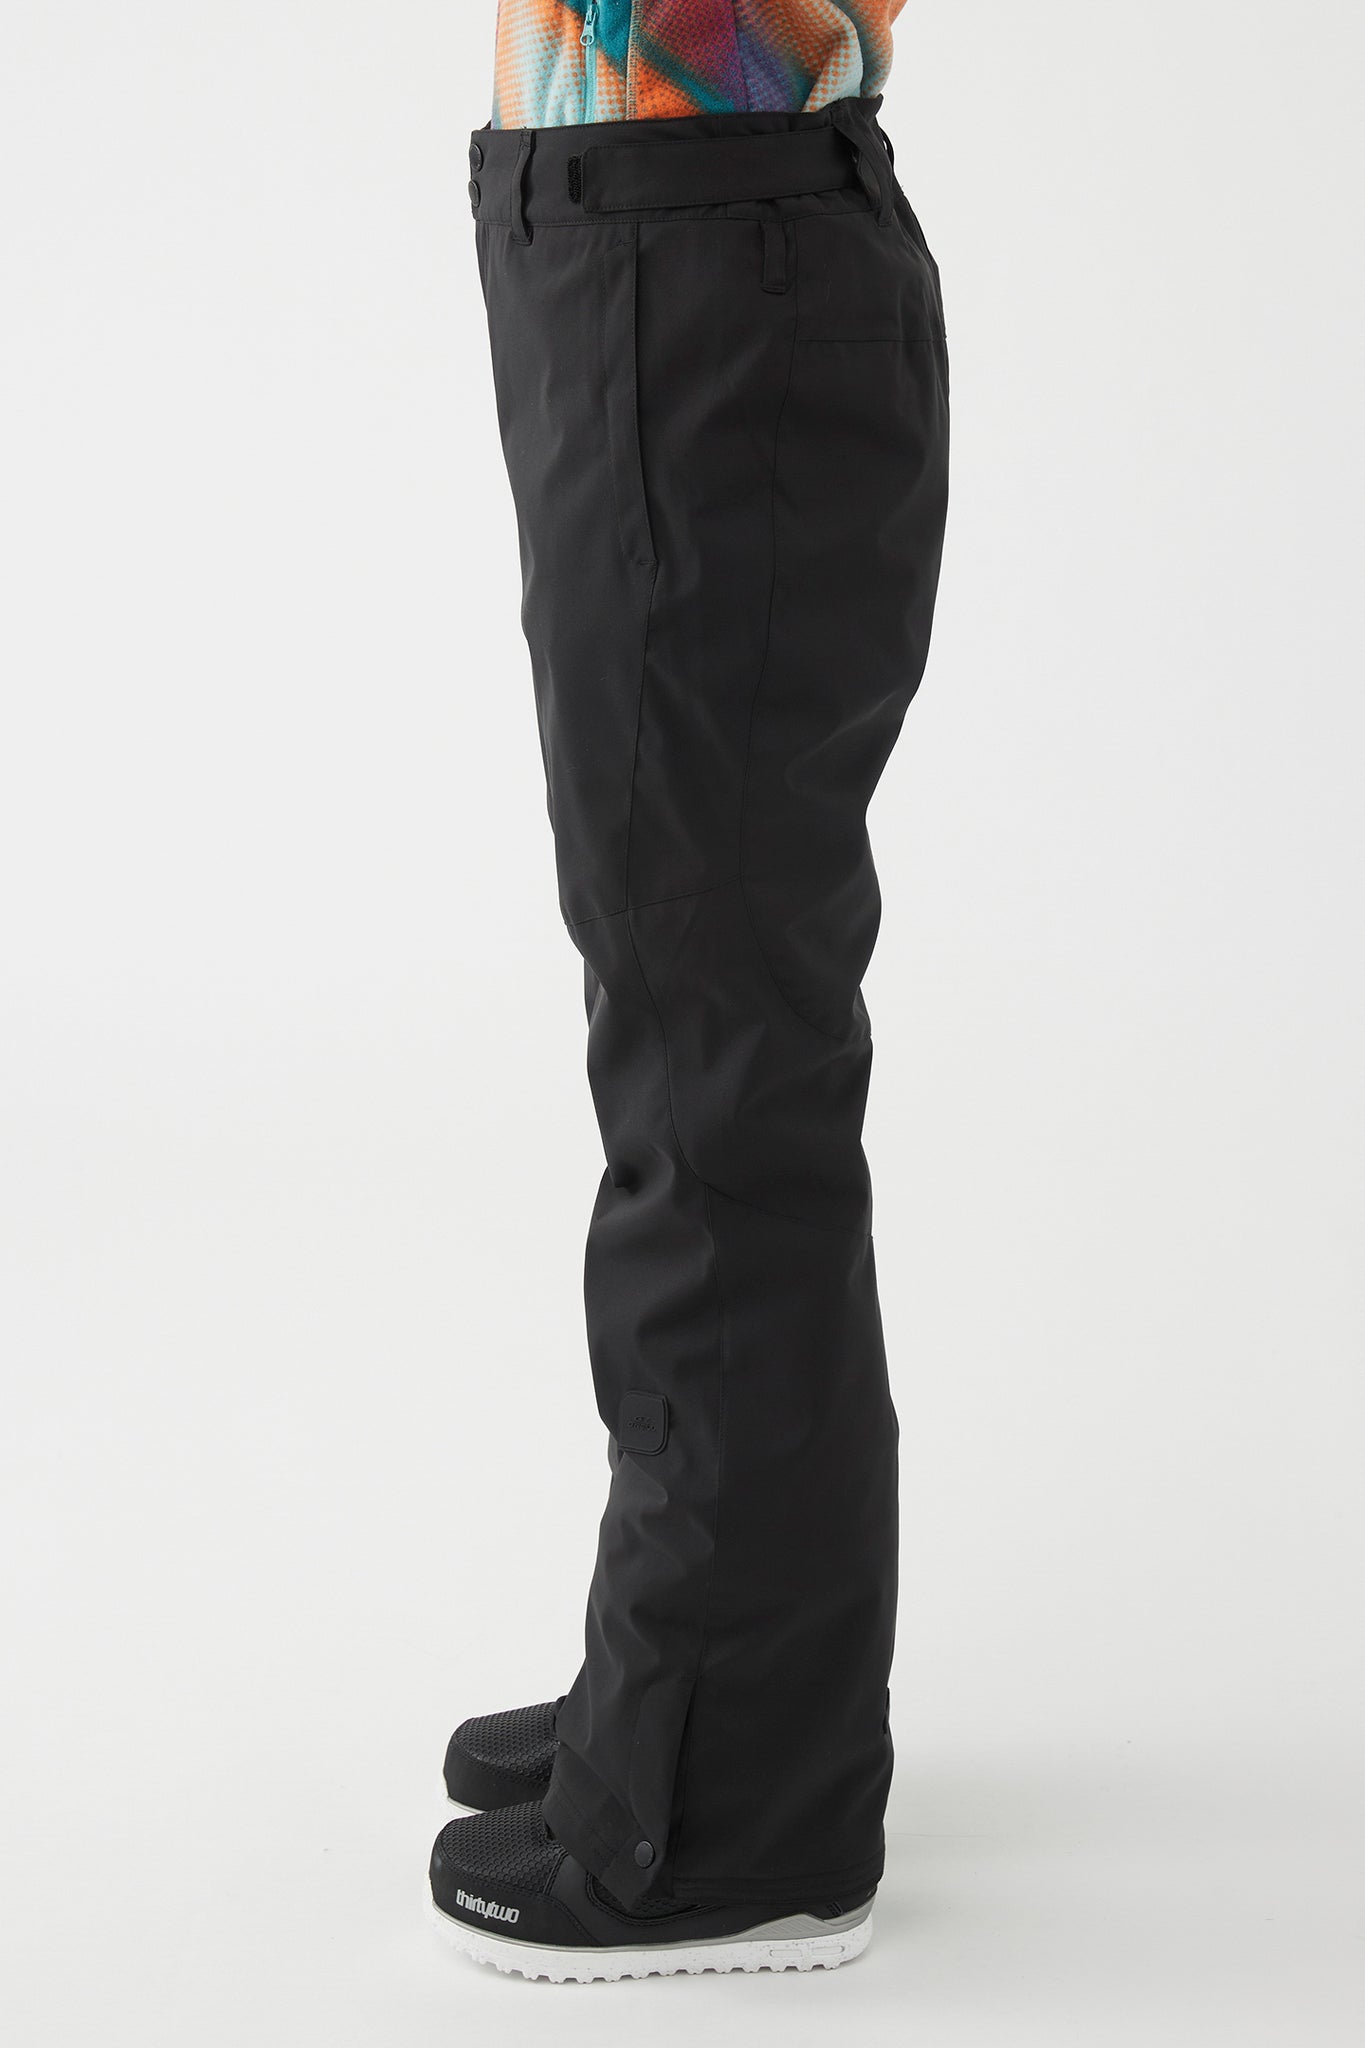 O'Neill - Star Insulated Women Pants - Black Out - S